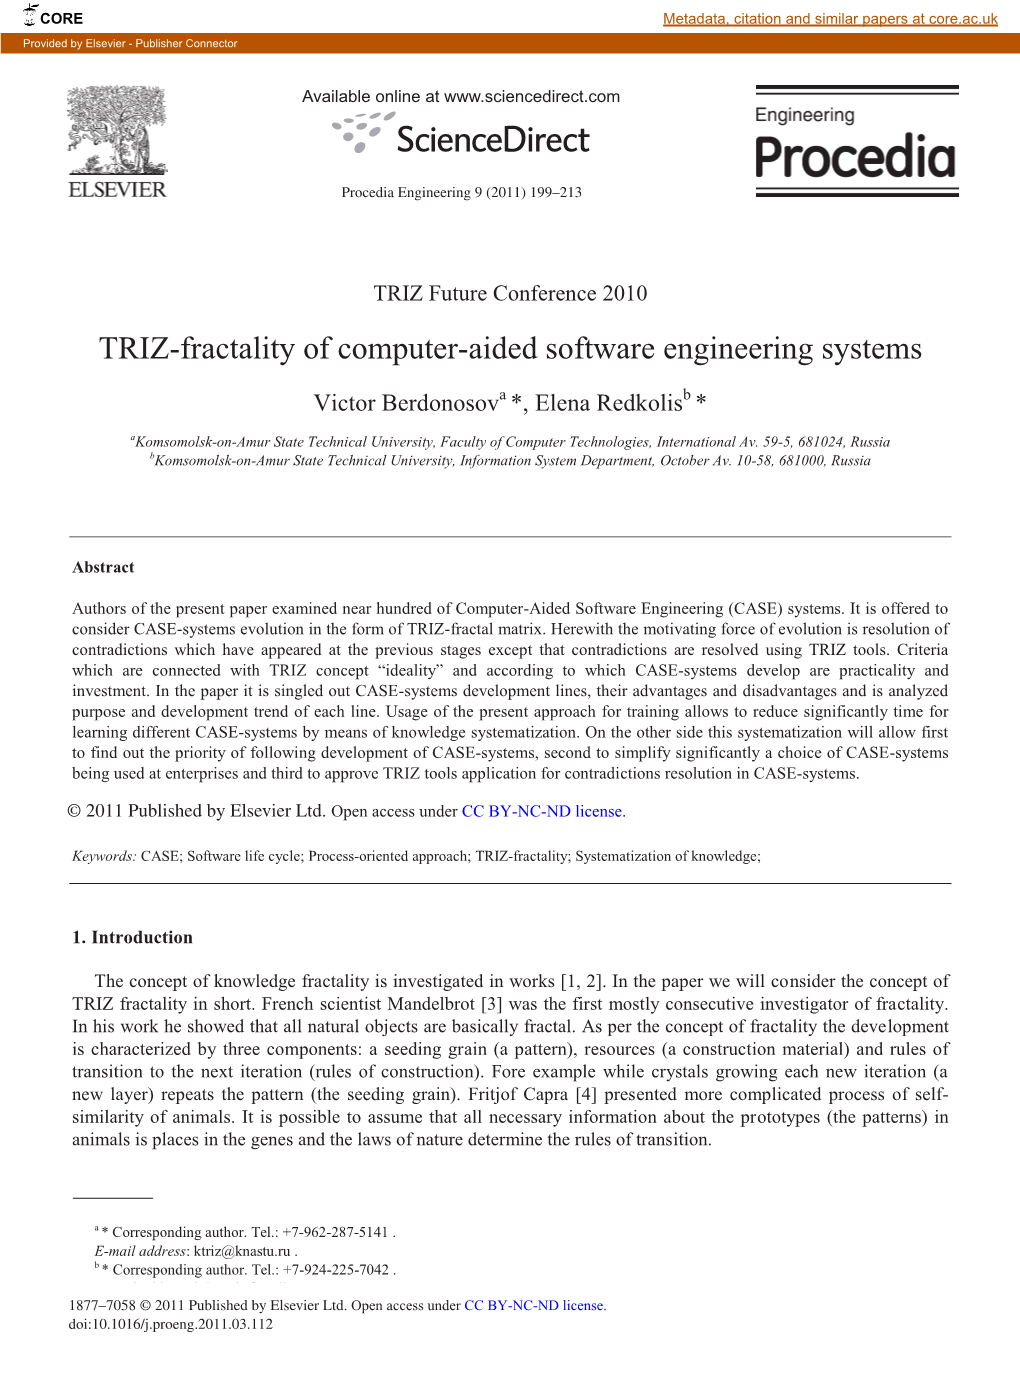 TRIZ-Fractality of Computer-Aided Software Engineering Systems